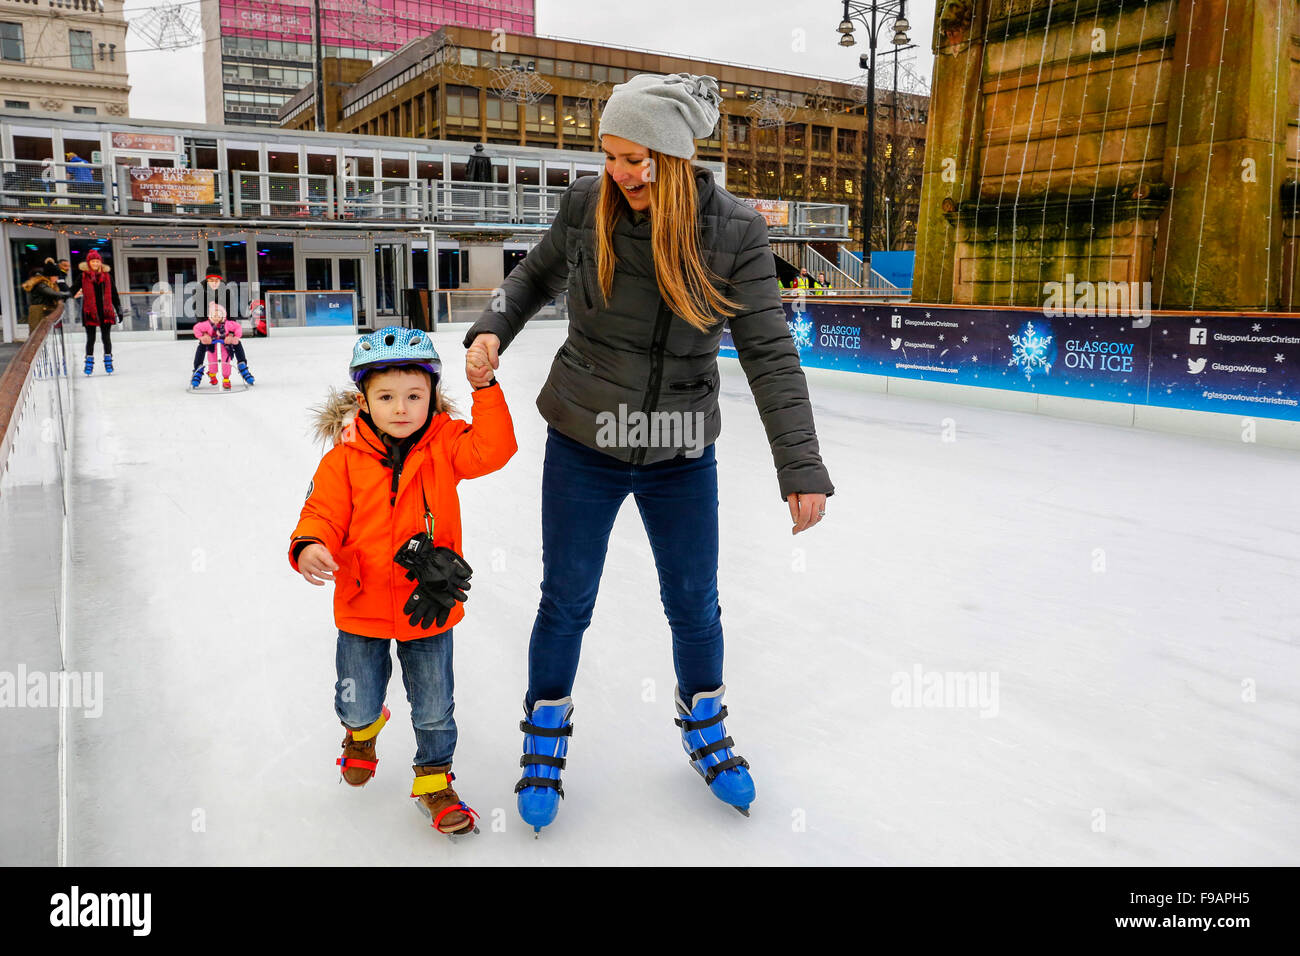 Glasgow, Scotland, UK. 15th Dec, 2015. Glasgow's annual  "Christmas on Ice" spectacular outdoor ice rink in George Square in the city centre attracts skaters of all ages and abilities. Those who are a little unsteady on the ice get a some help from parents and relatives. A fun way to have a break from Christmas shopping.Here adam Fyfe, aged 4 from Kirkintilloch is skating with a little help from his mother, Angela. Credit:  Findlay/Alamy Live News Stock Photo